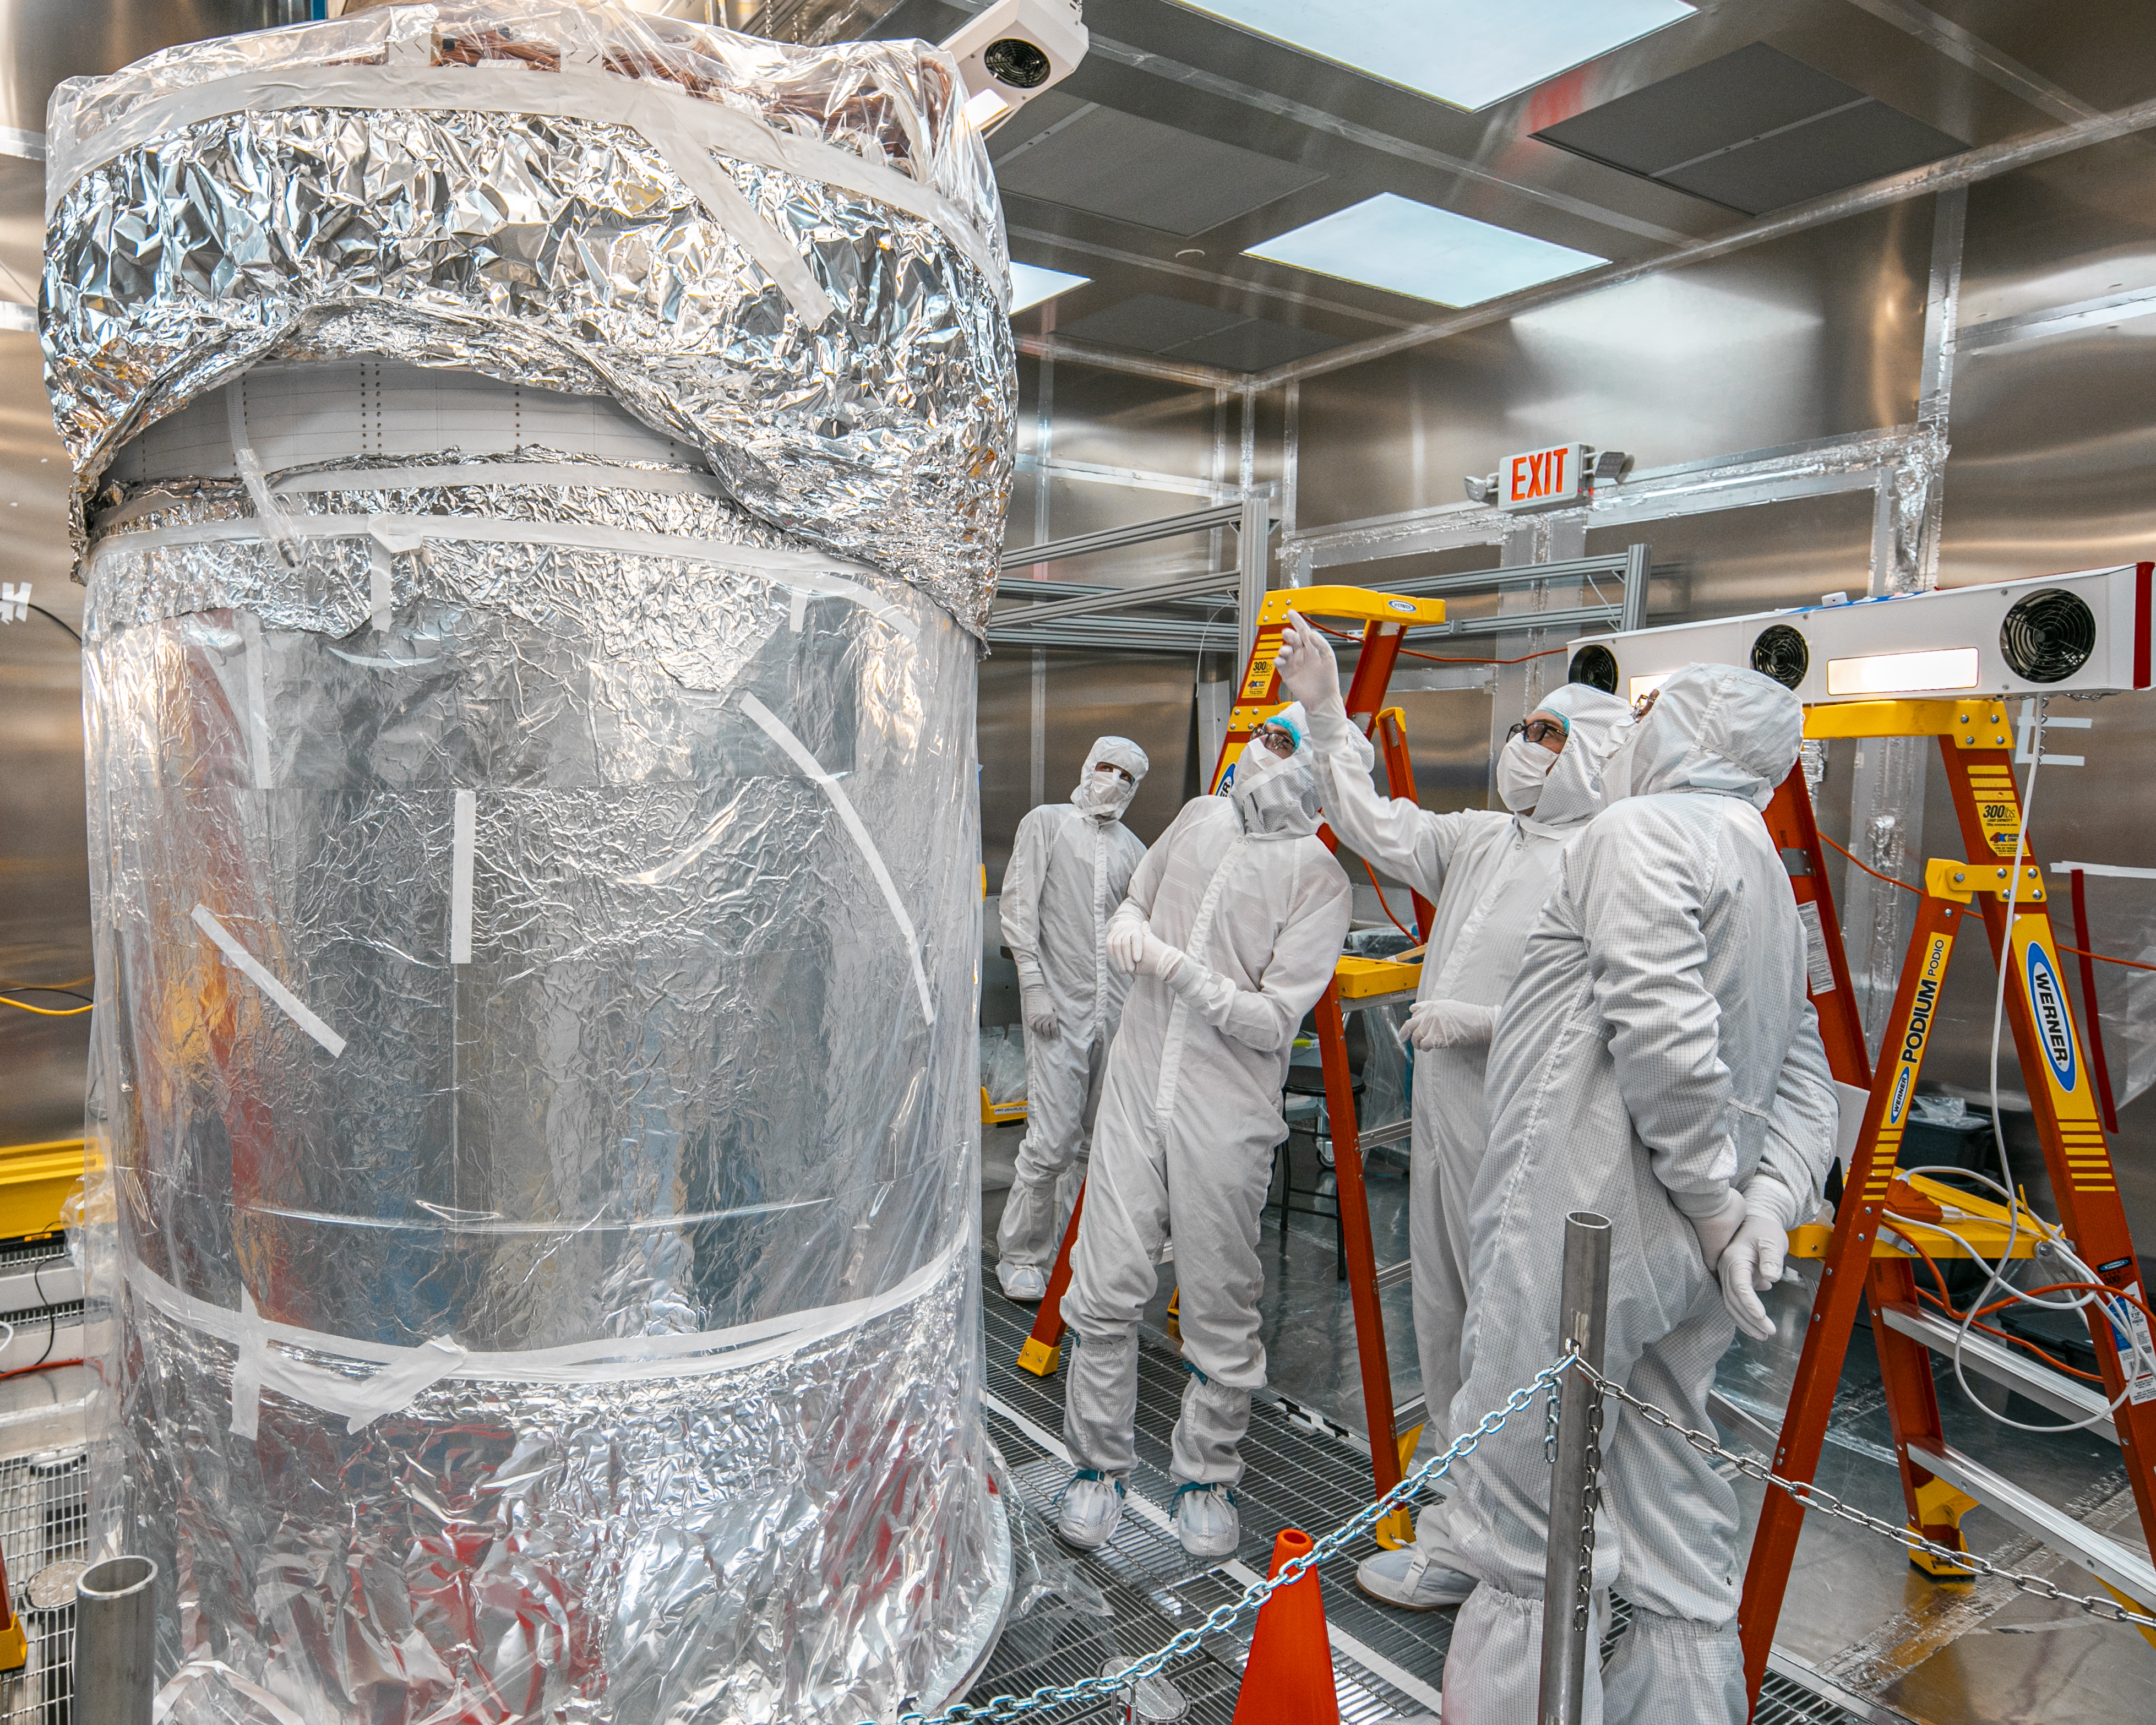 physicists in clean suits examine an inner dark matter detector